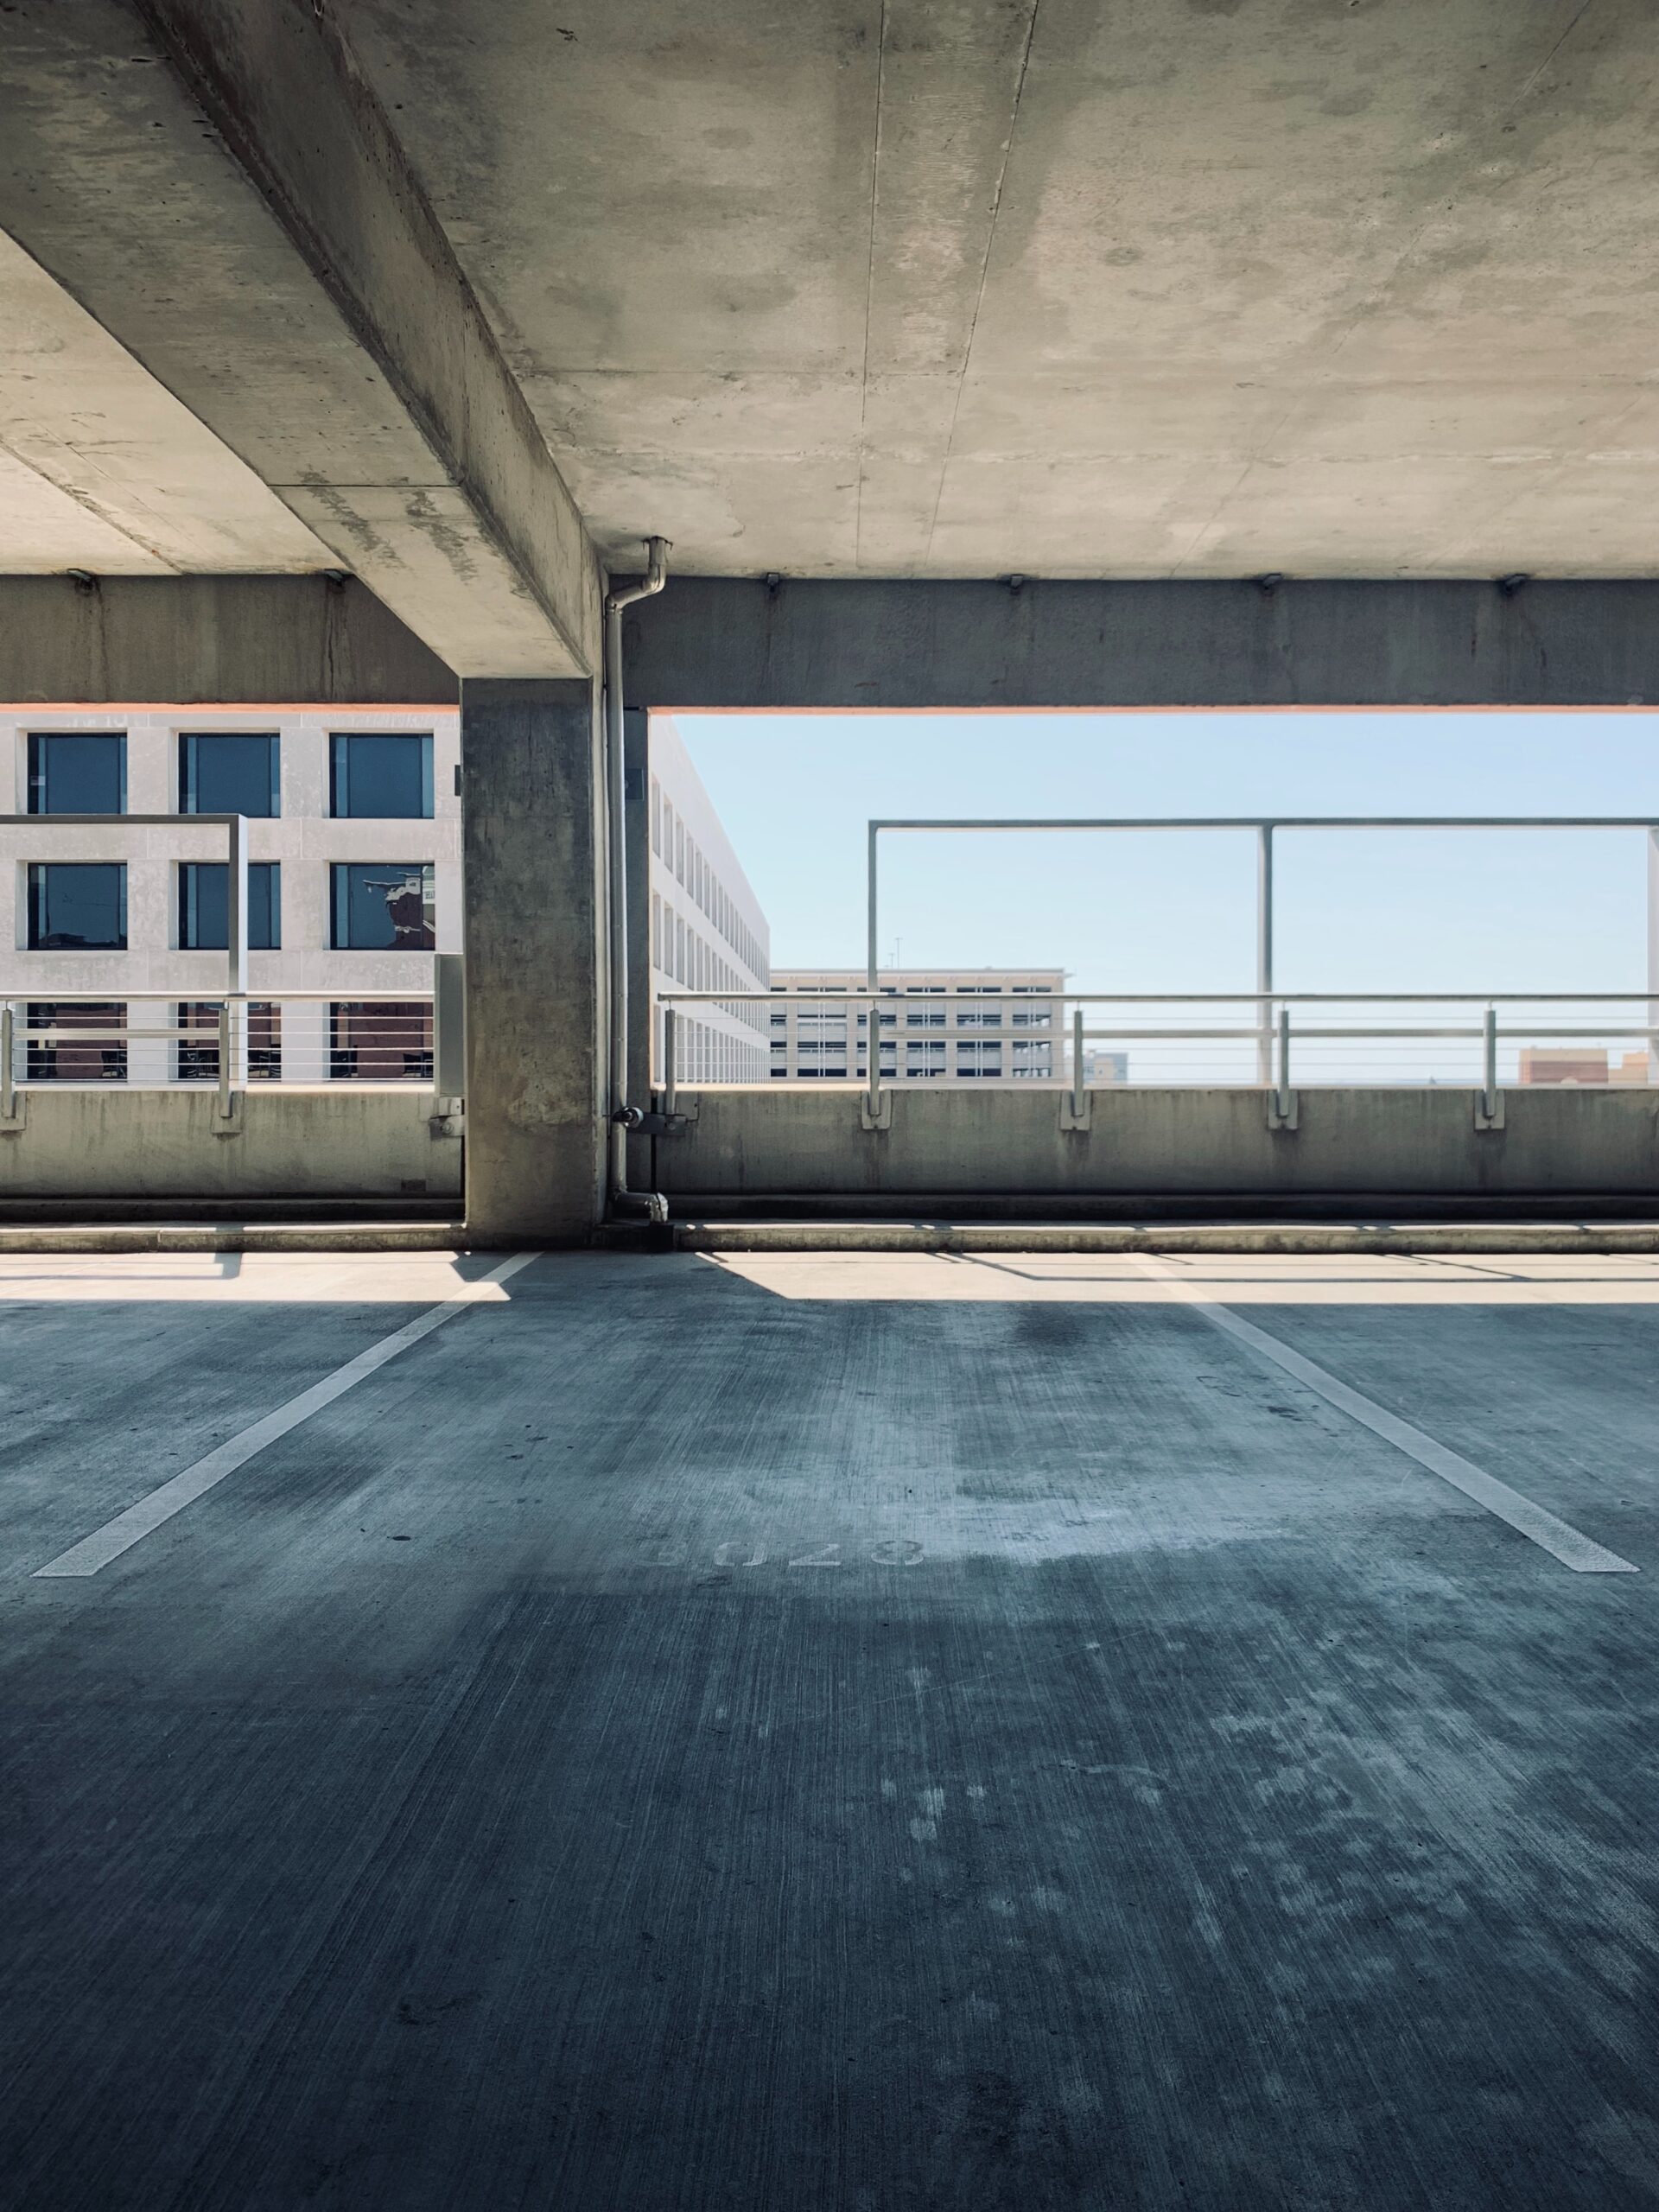 background image of a parking garage to be cleaned